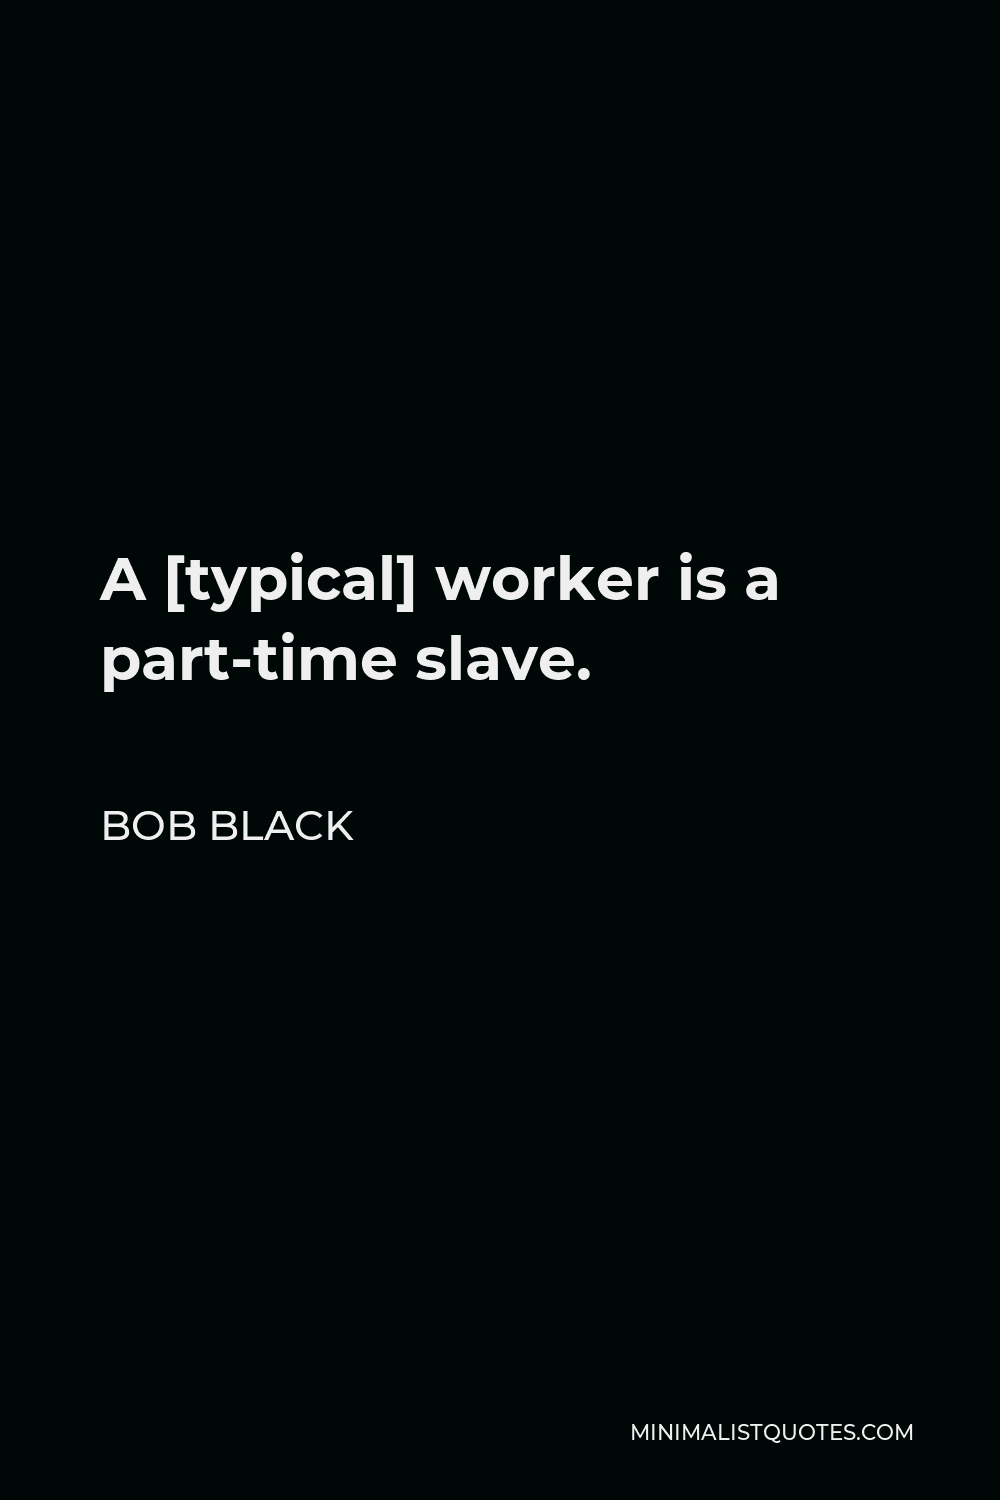 Bob Black Quote - A [typical] worker is a part-time slave.